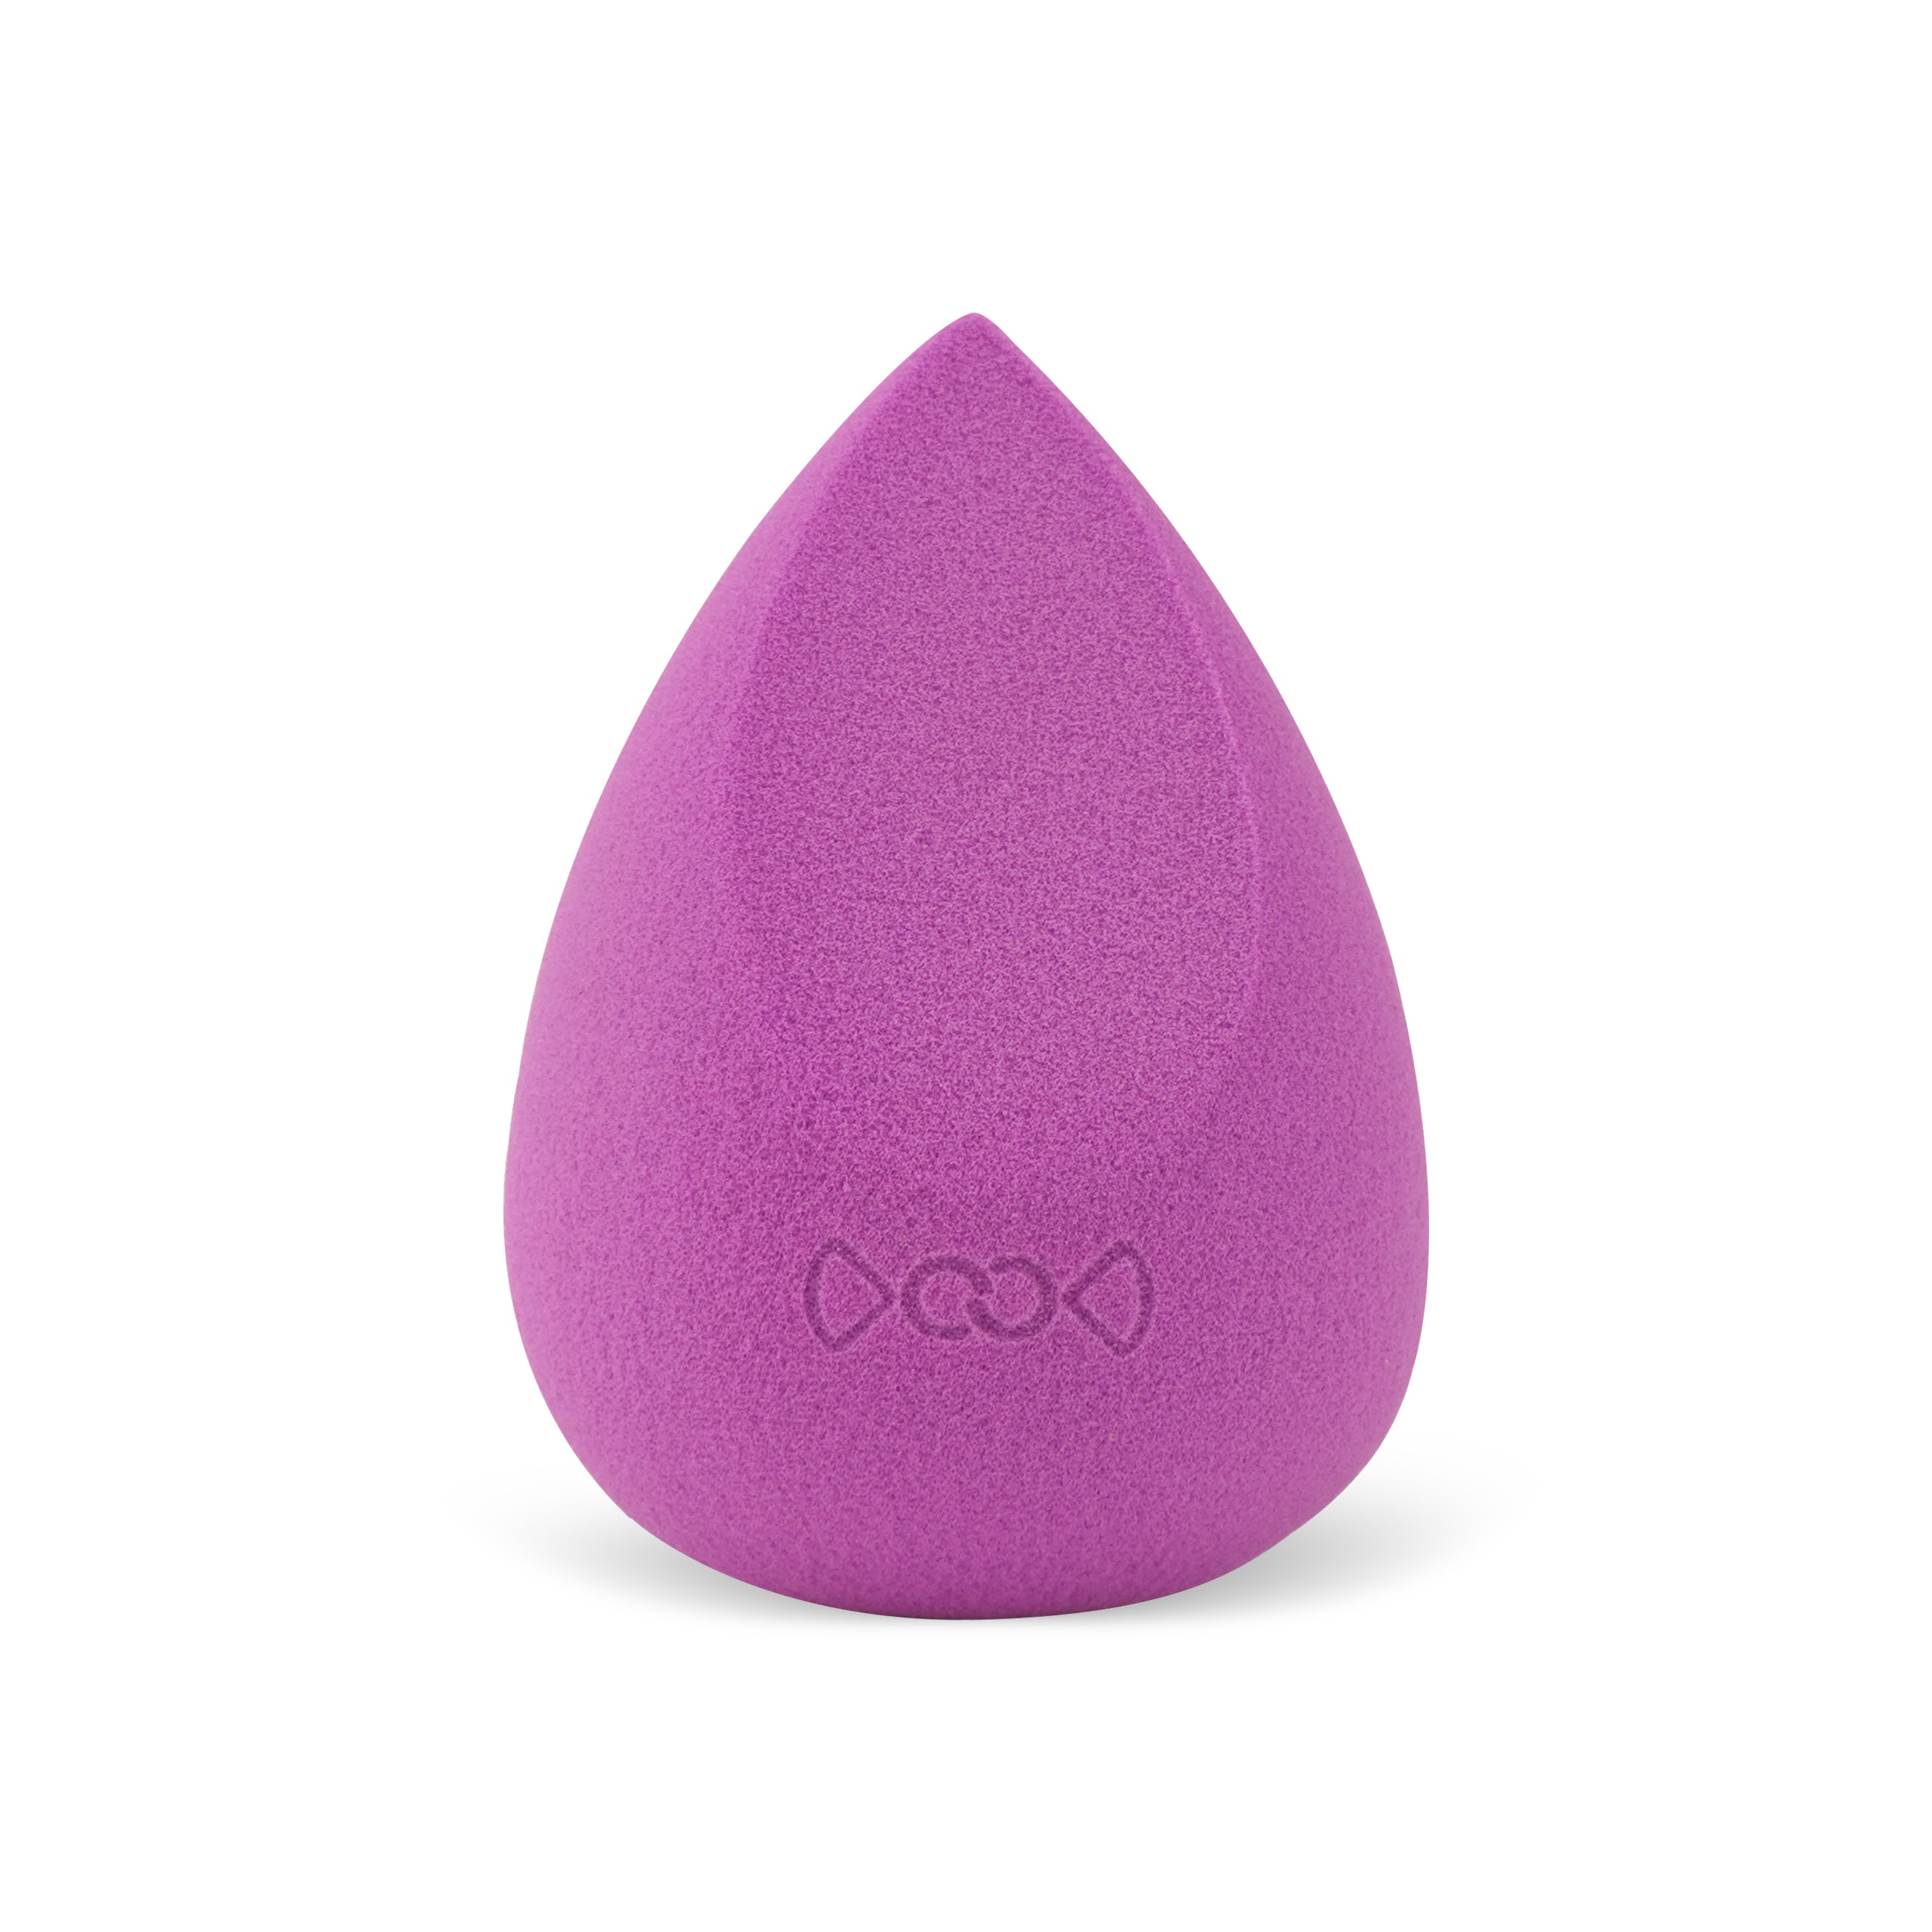 Cosmetic Candy Makeup Sponge - Passion Pink - One Cut Tear Drop